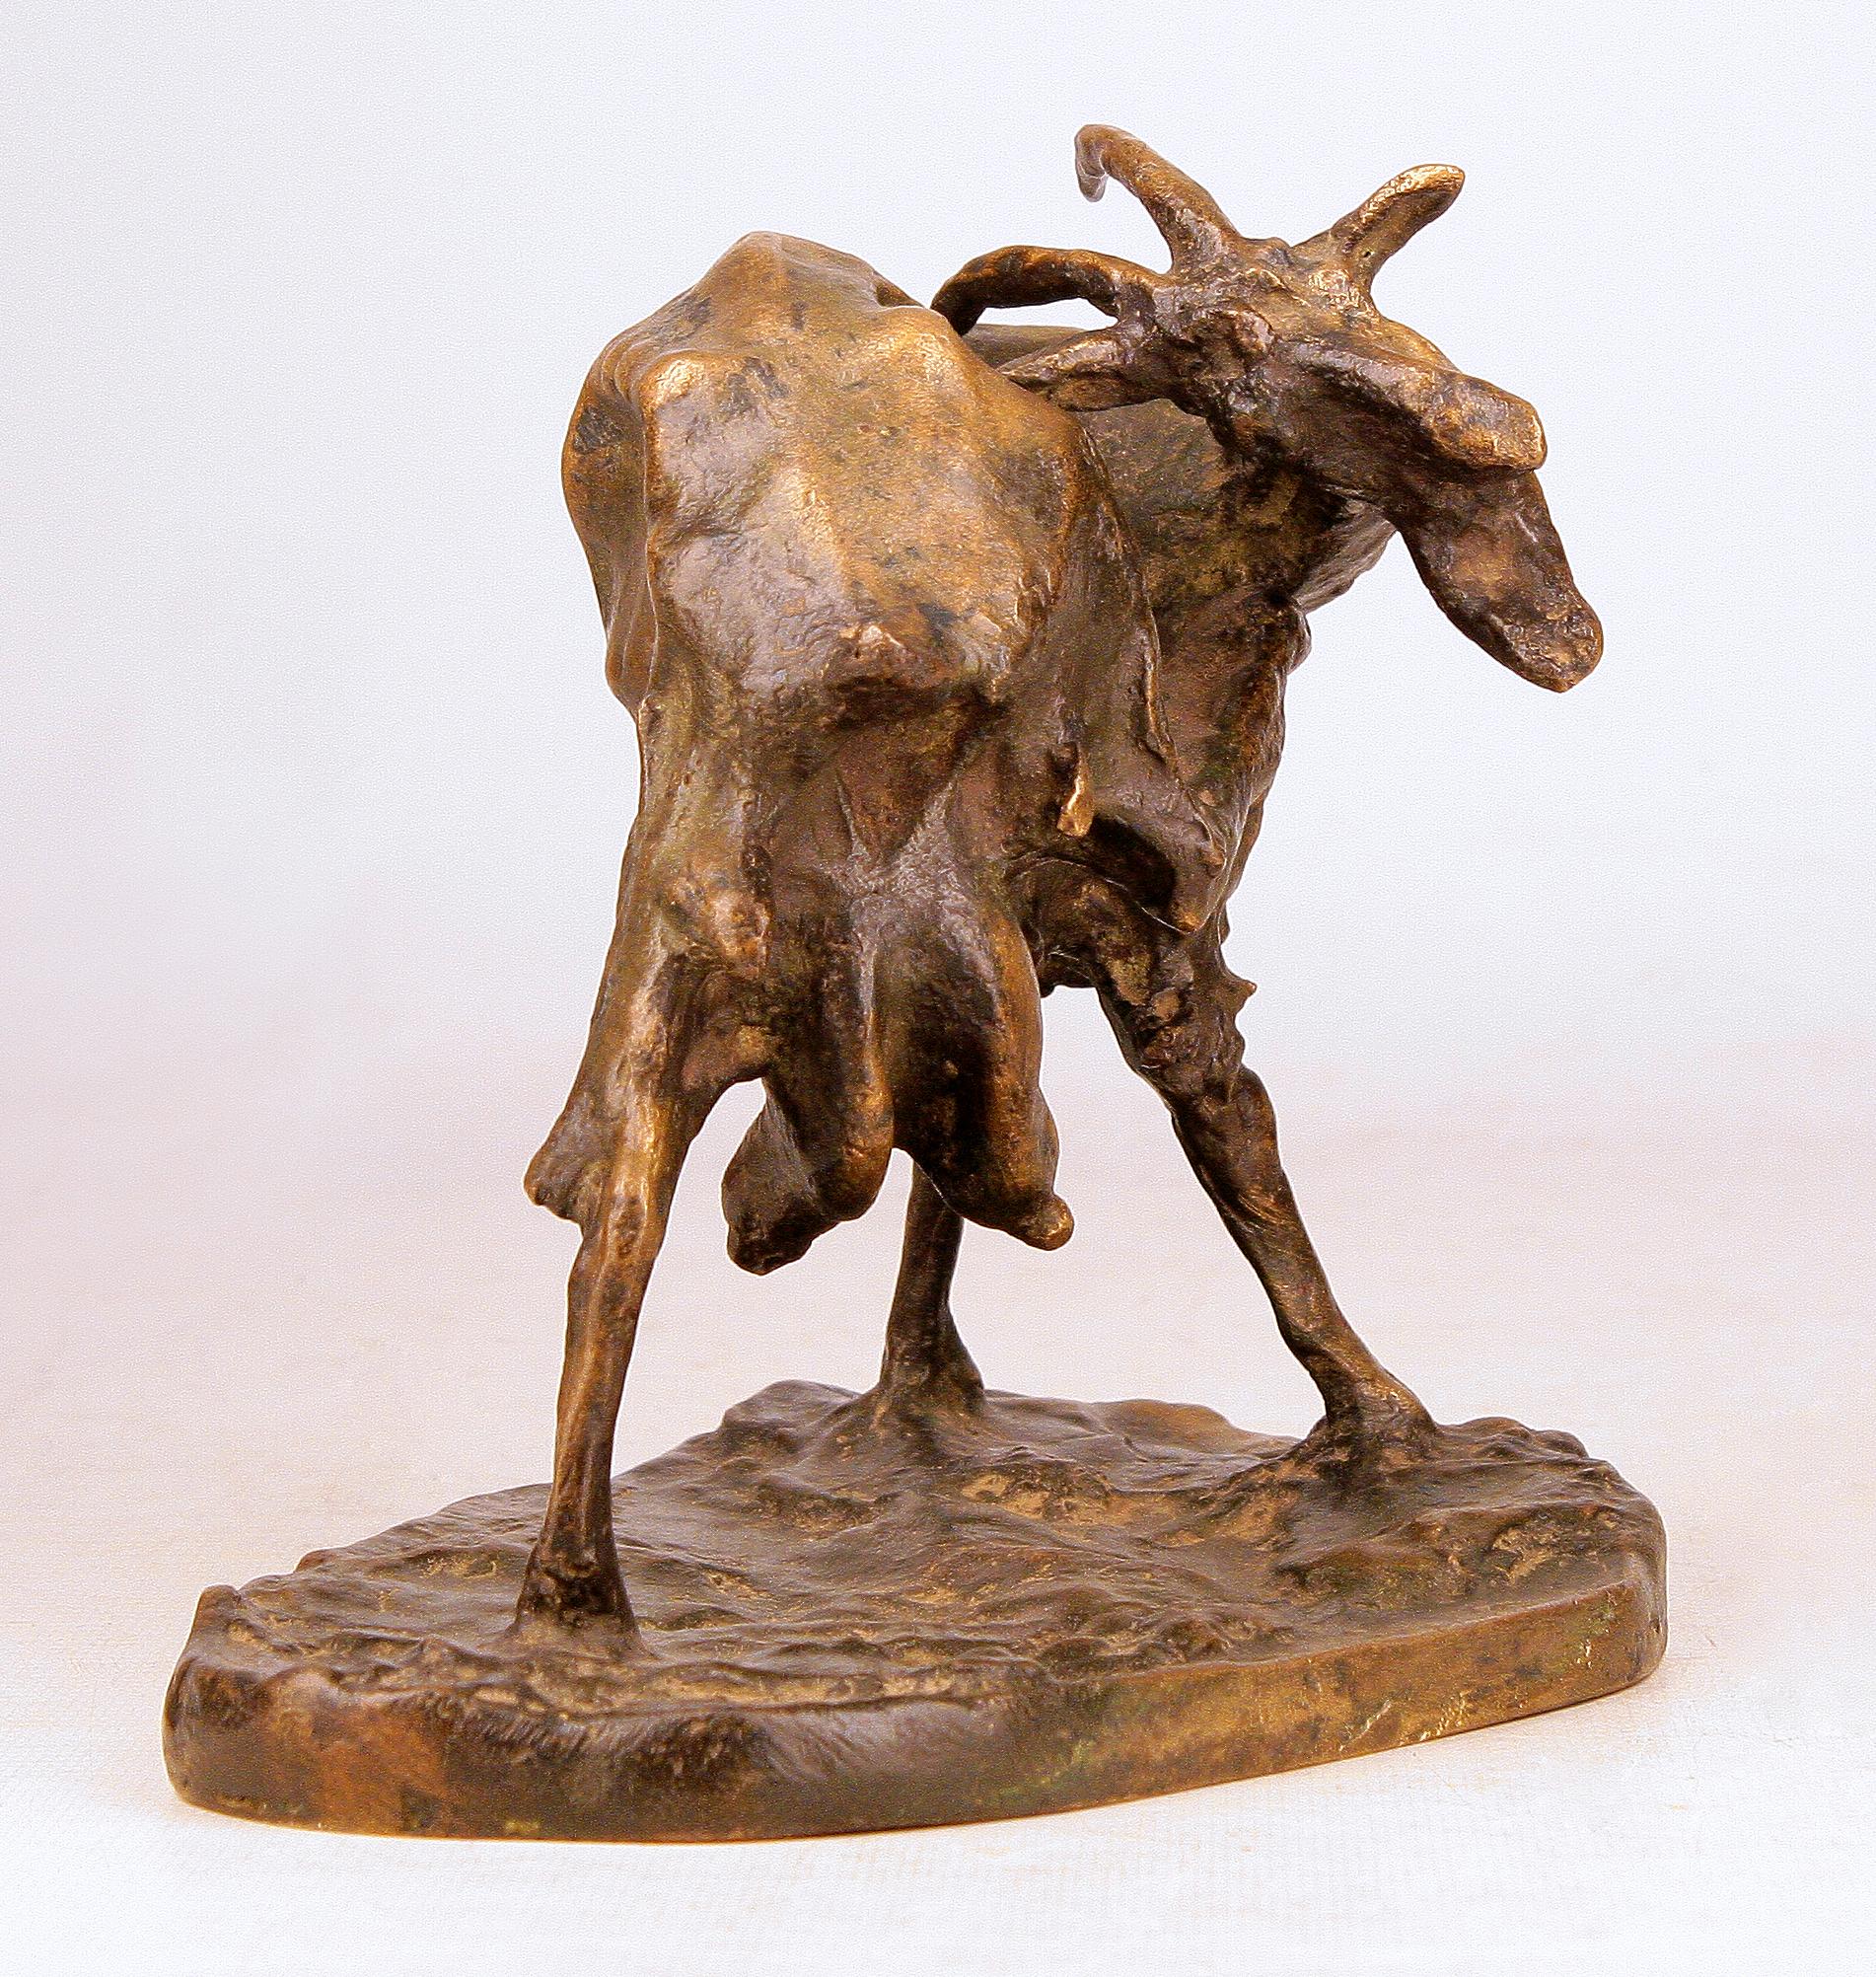 Bohemian Patinated Bronze Early 20th Century Sculpture of Goat by Italian Ernesto Bazzaro For Sale